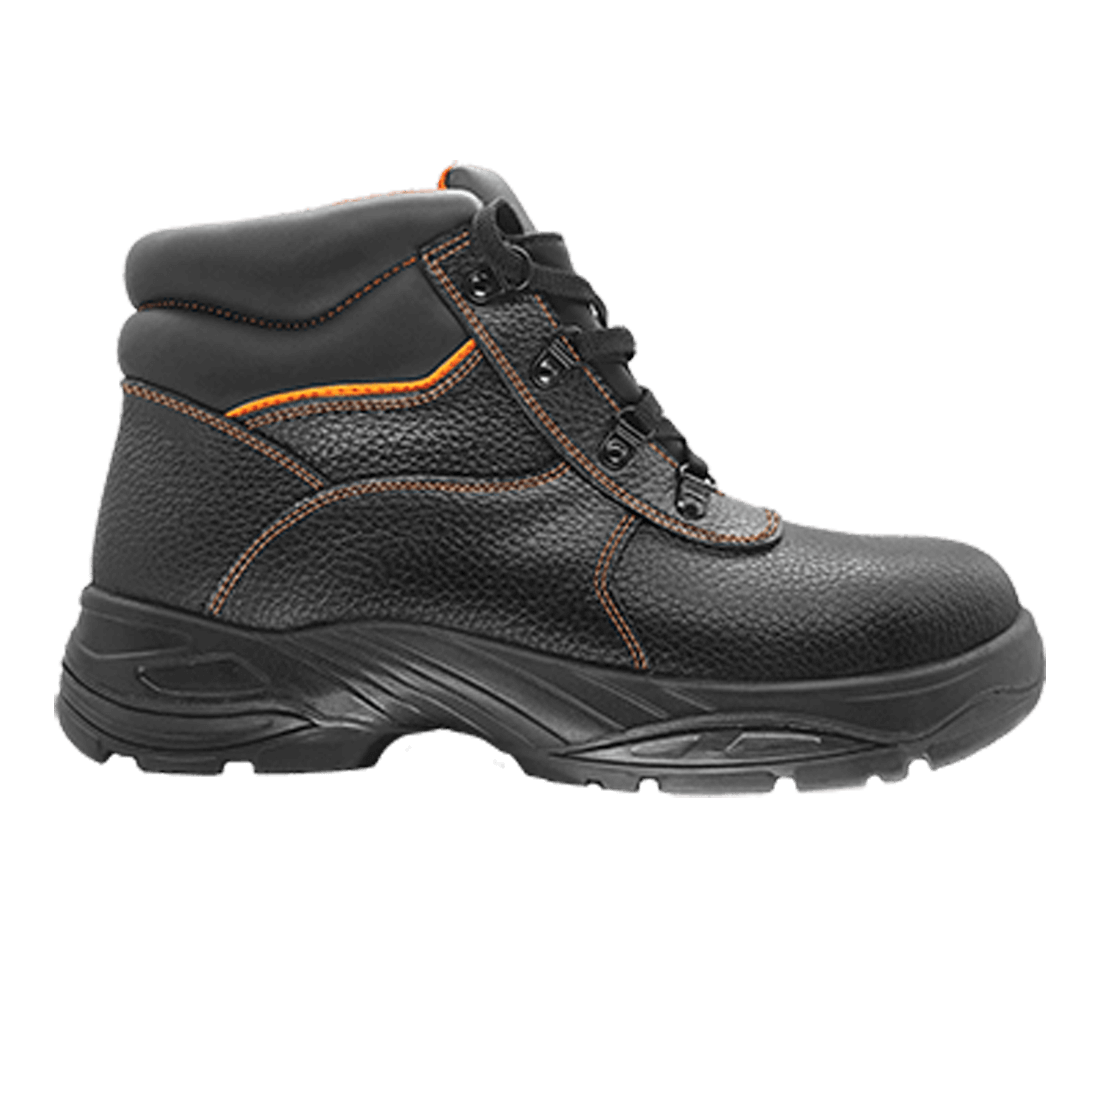 NEW OVERCAP BSF FAST SHOE | Safety System Sir